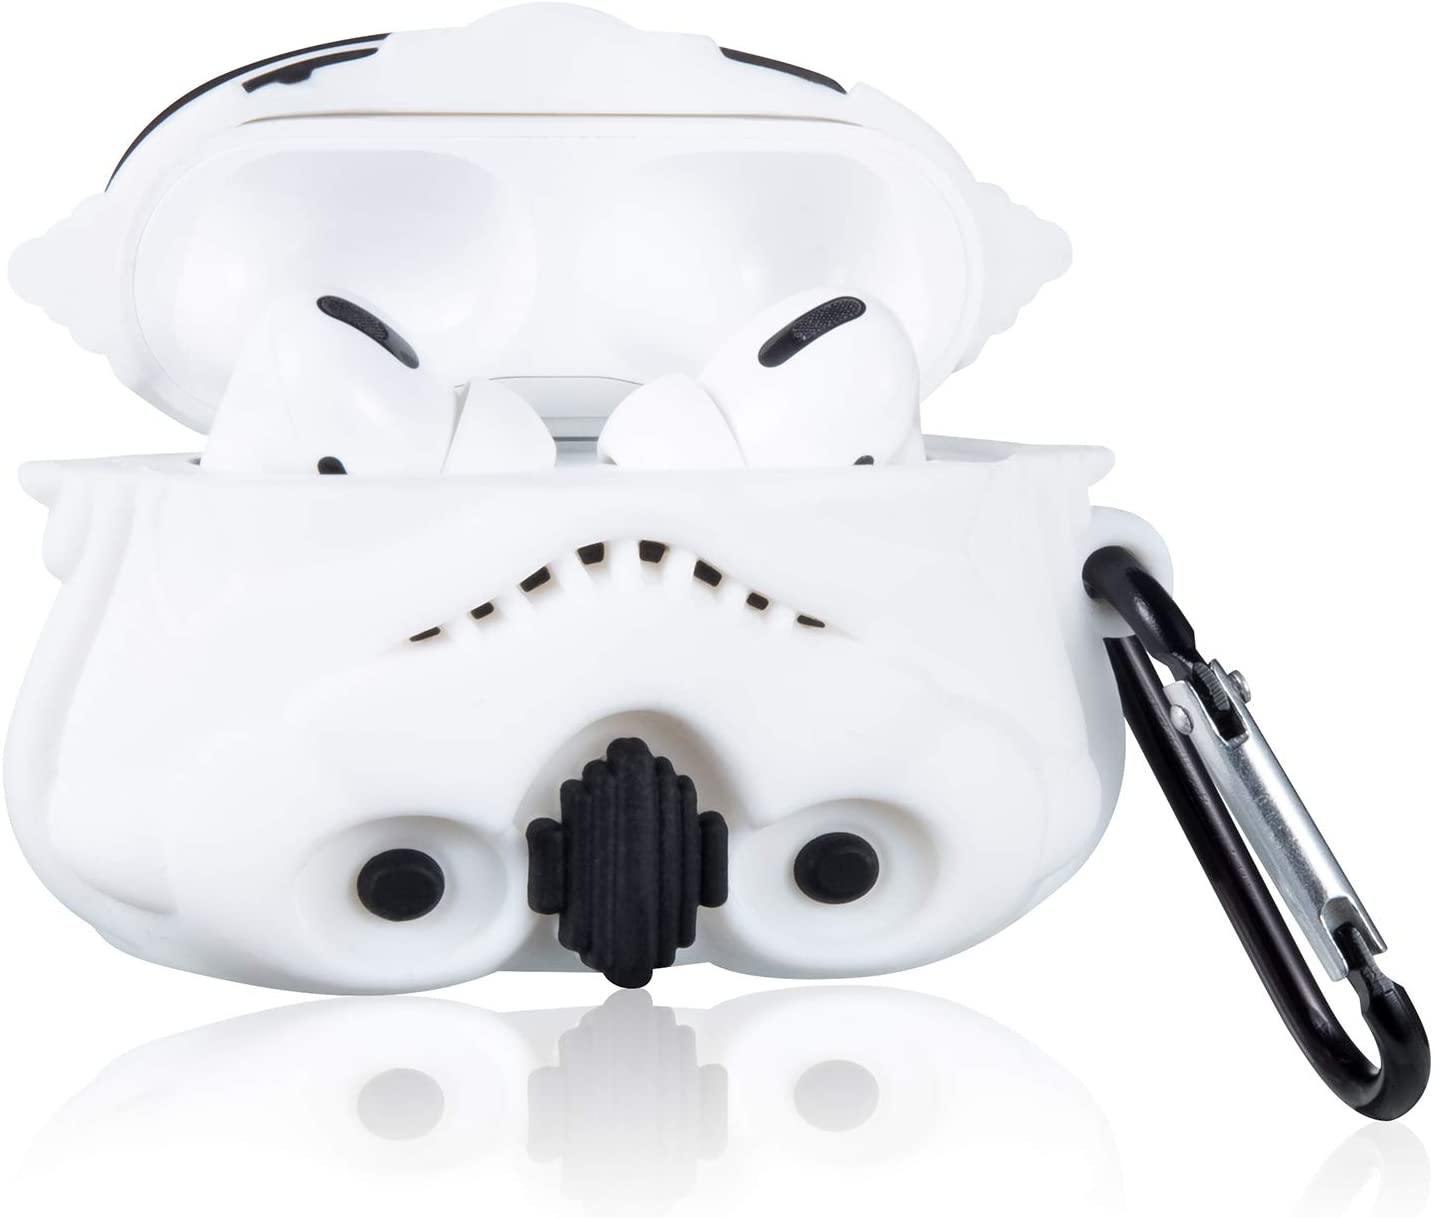 Storm Trooper Star Wars Apple Airpods & AirPods Pro Case